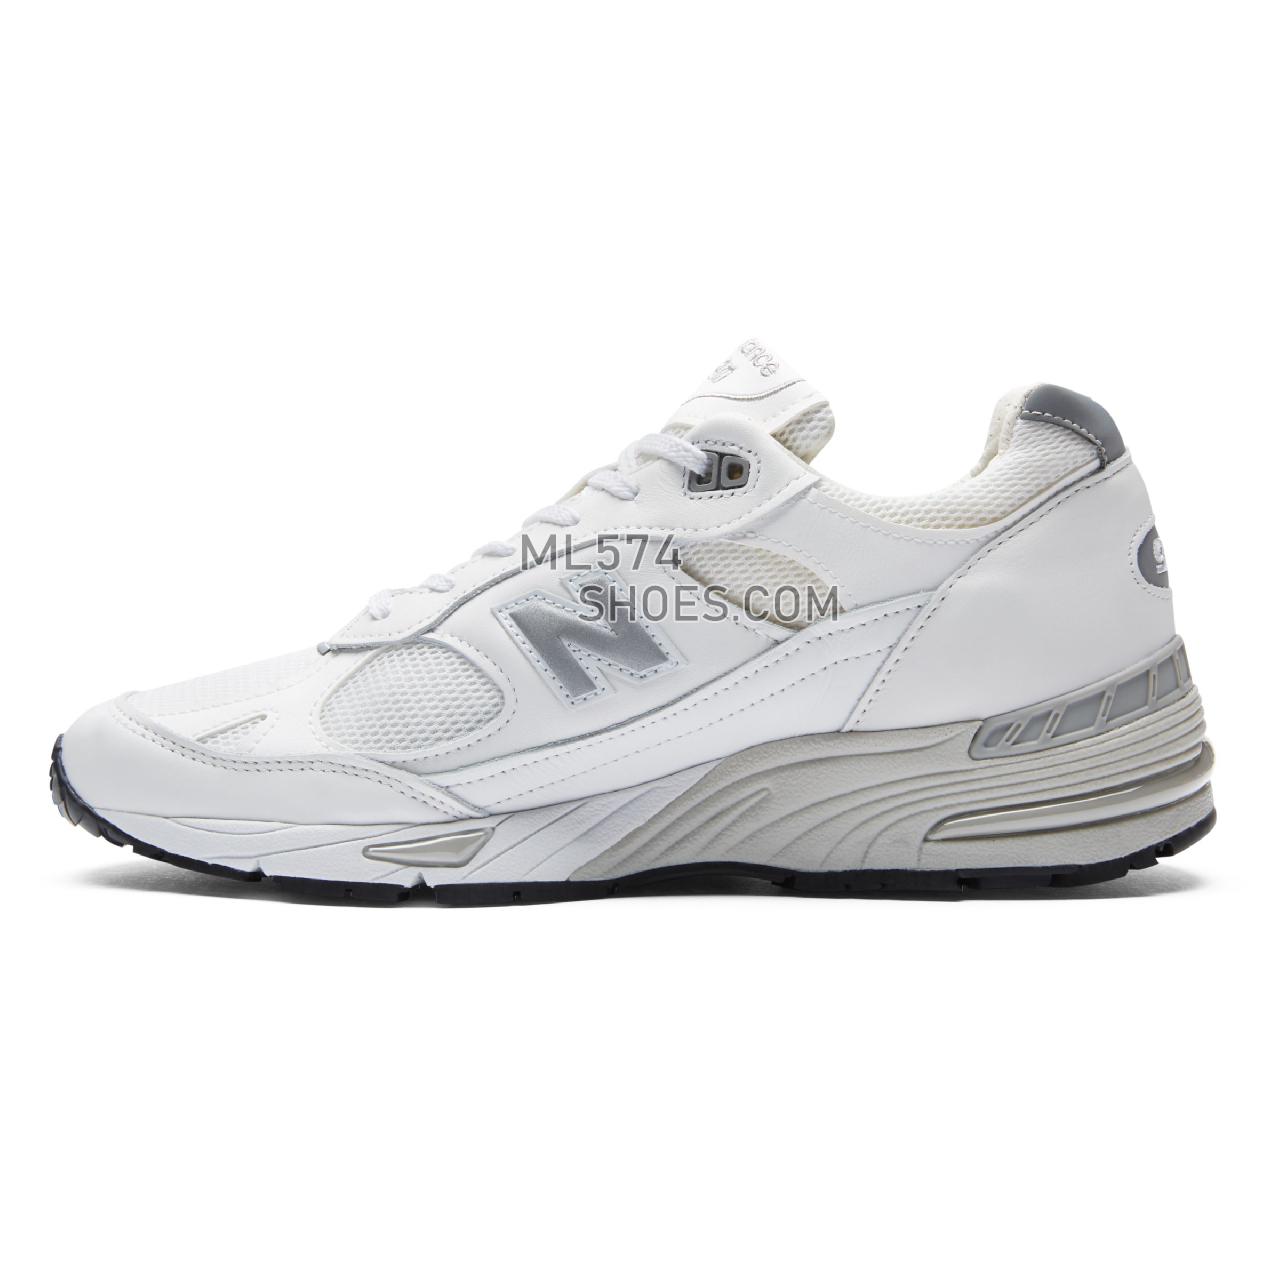 New Balance Made in UK 991 - Men's 991 Made in UK Classic M991-LM - White with Silver - M991WHI